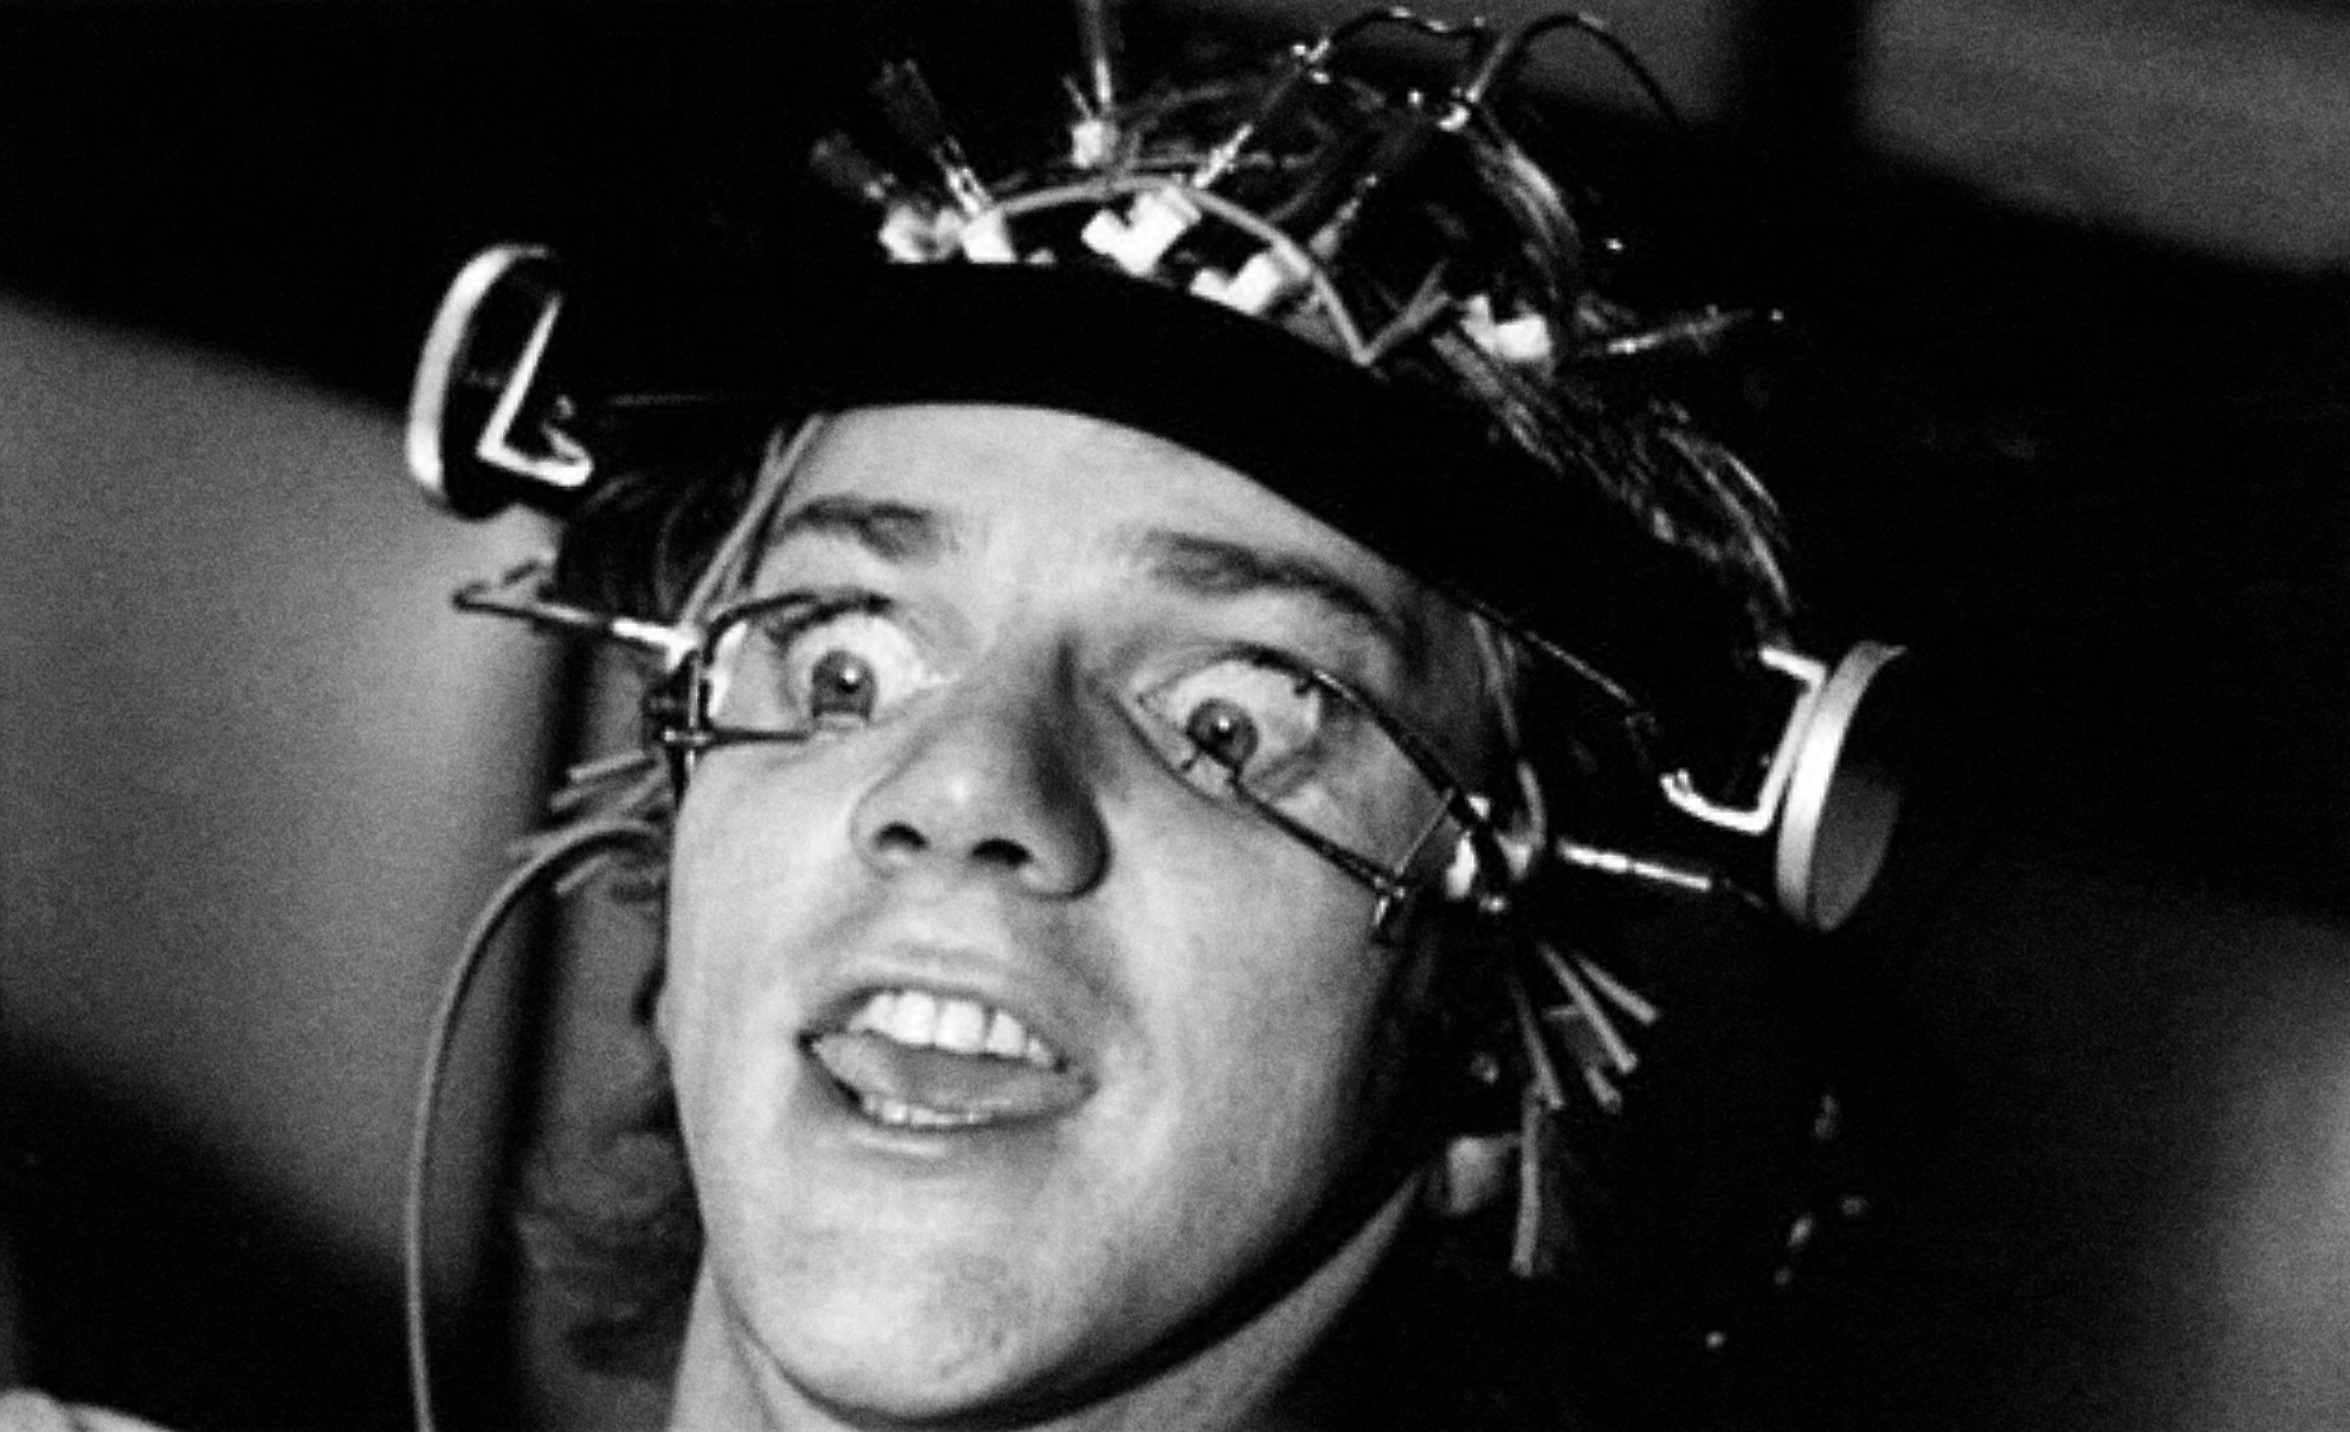 A still from the film Clockwork Orange, showing the protagonist with a contraption that keeps his eyes open. On his face an expression of bemused panic.